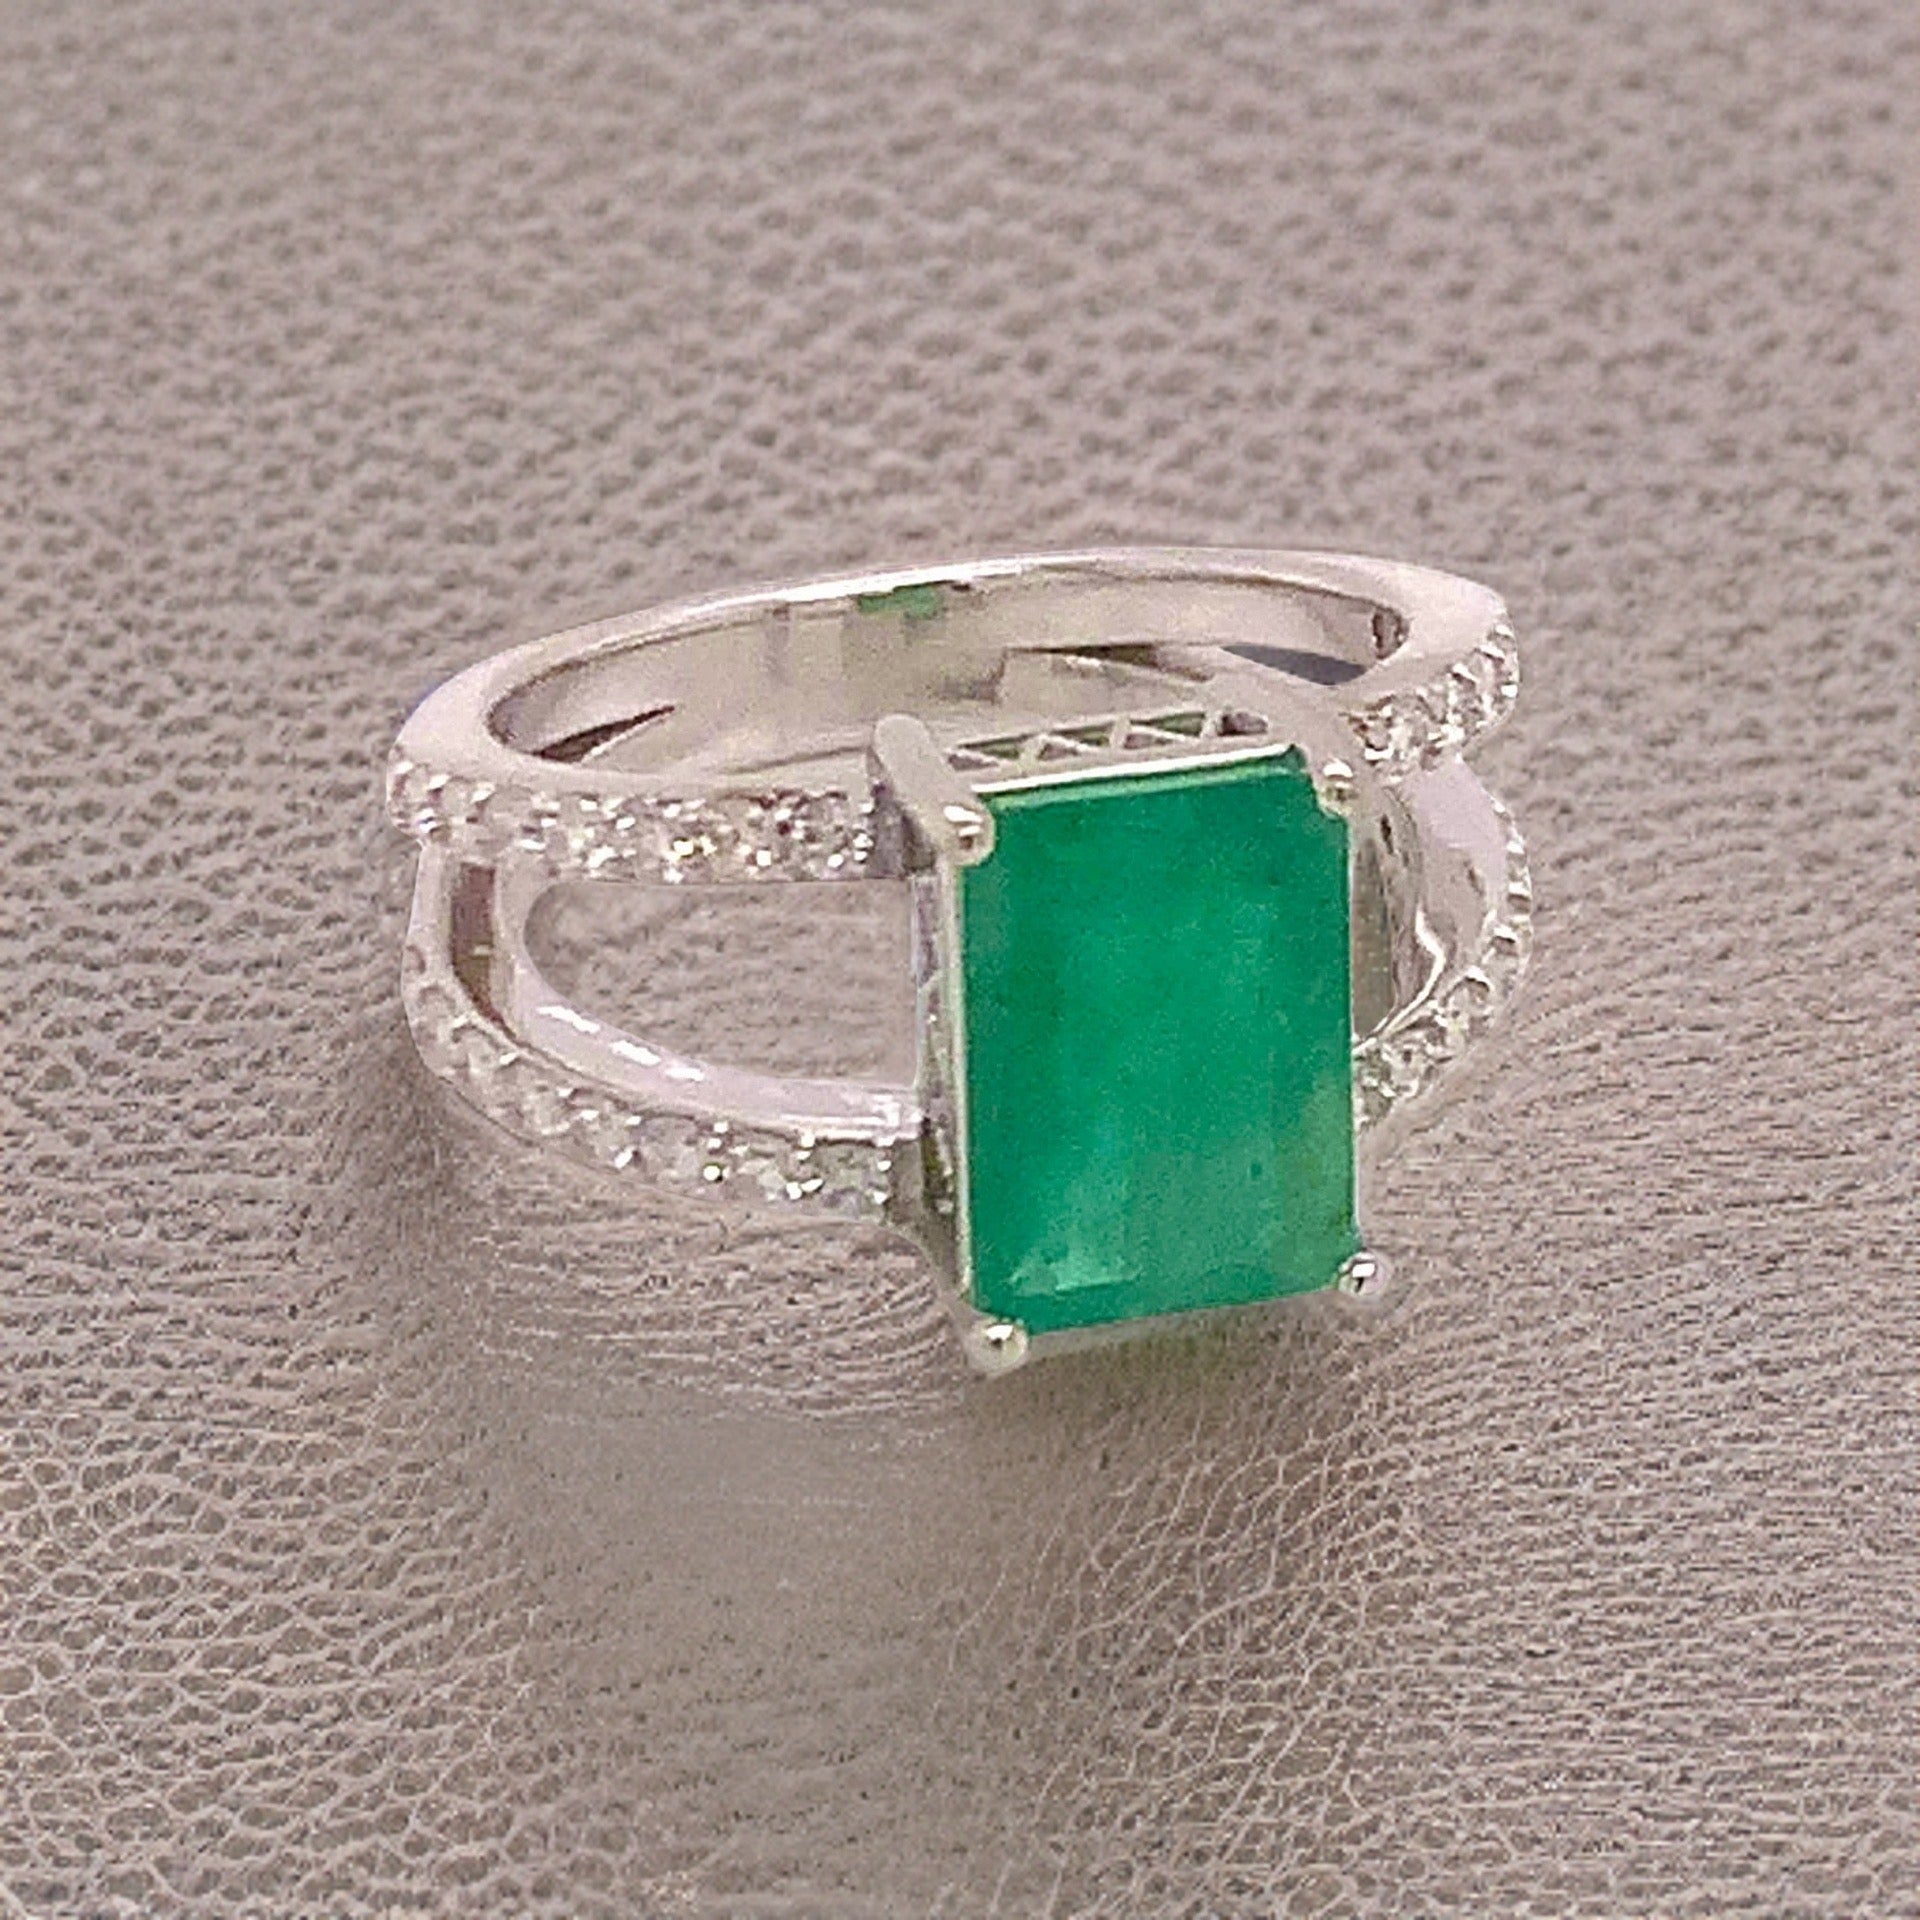 Natural Emerald Diamond Ring 14k Gold 2.85 TCW Size 7 Certified $5,970 111873 - Certified Fine Jewelry